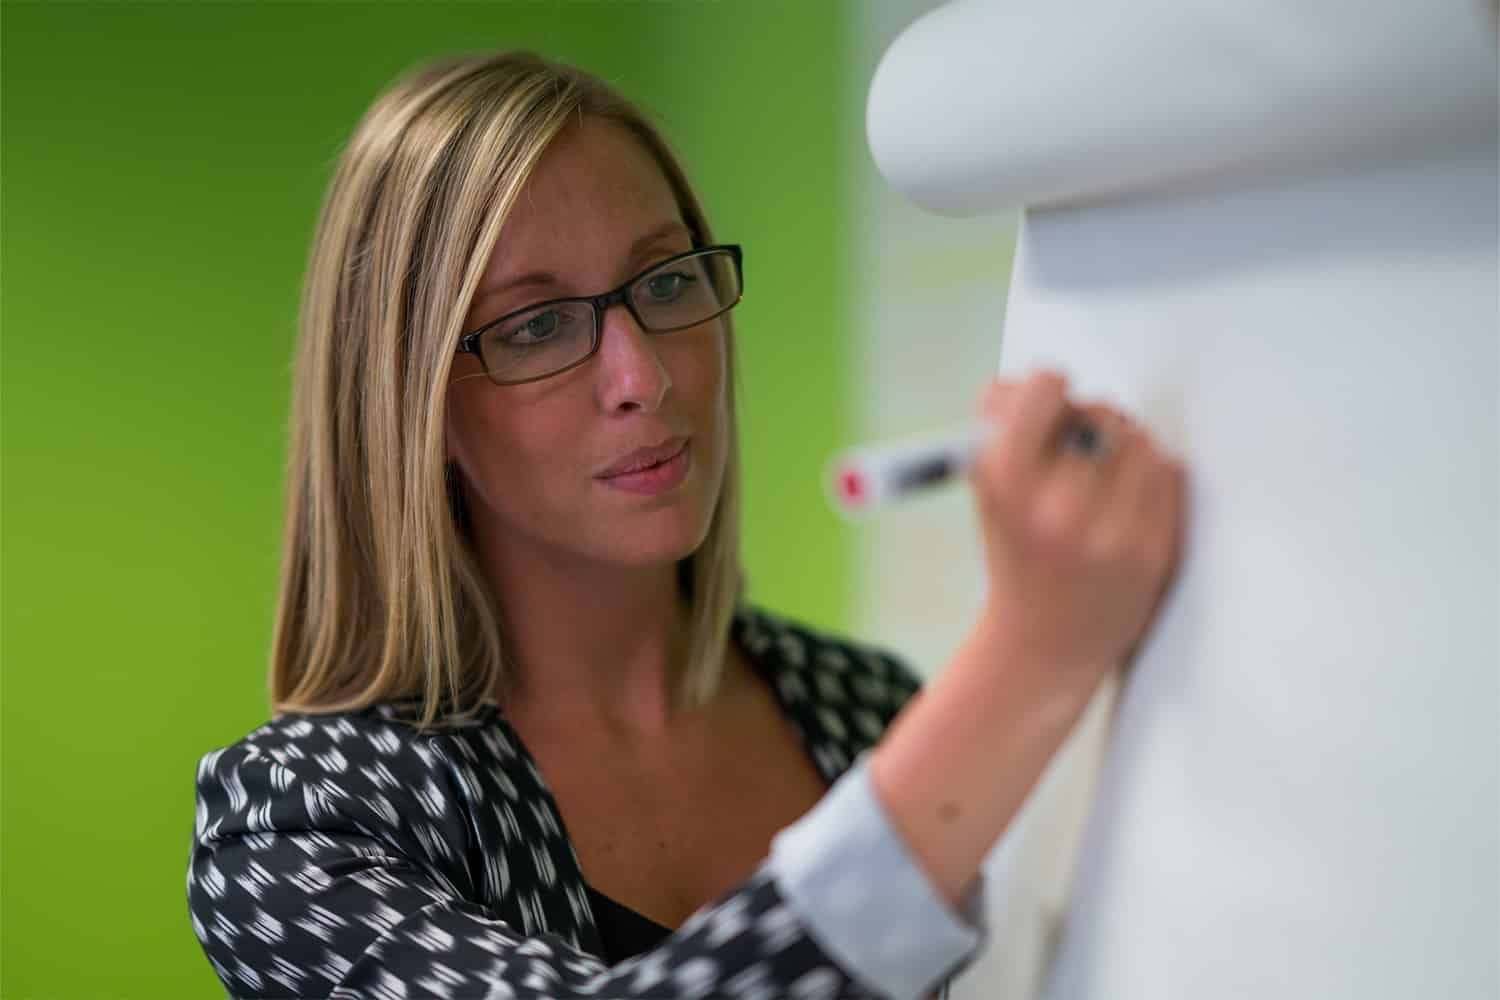 A woman wearing glasses is writing on a whiteboard.